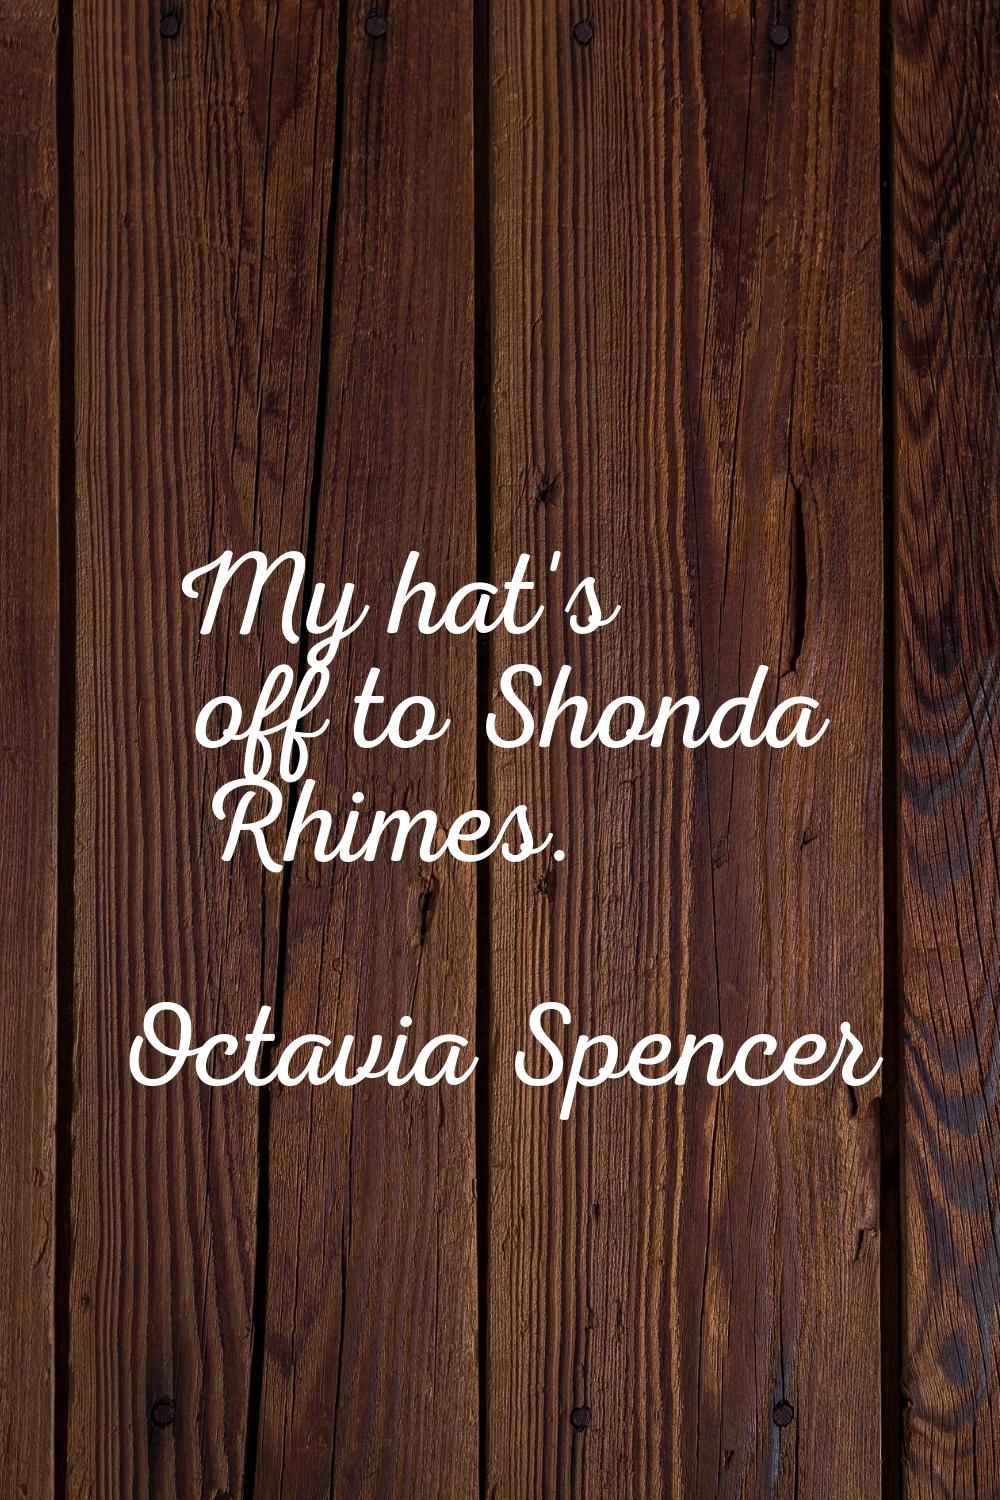 My hat's off to Shonda Rhimes.